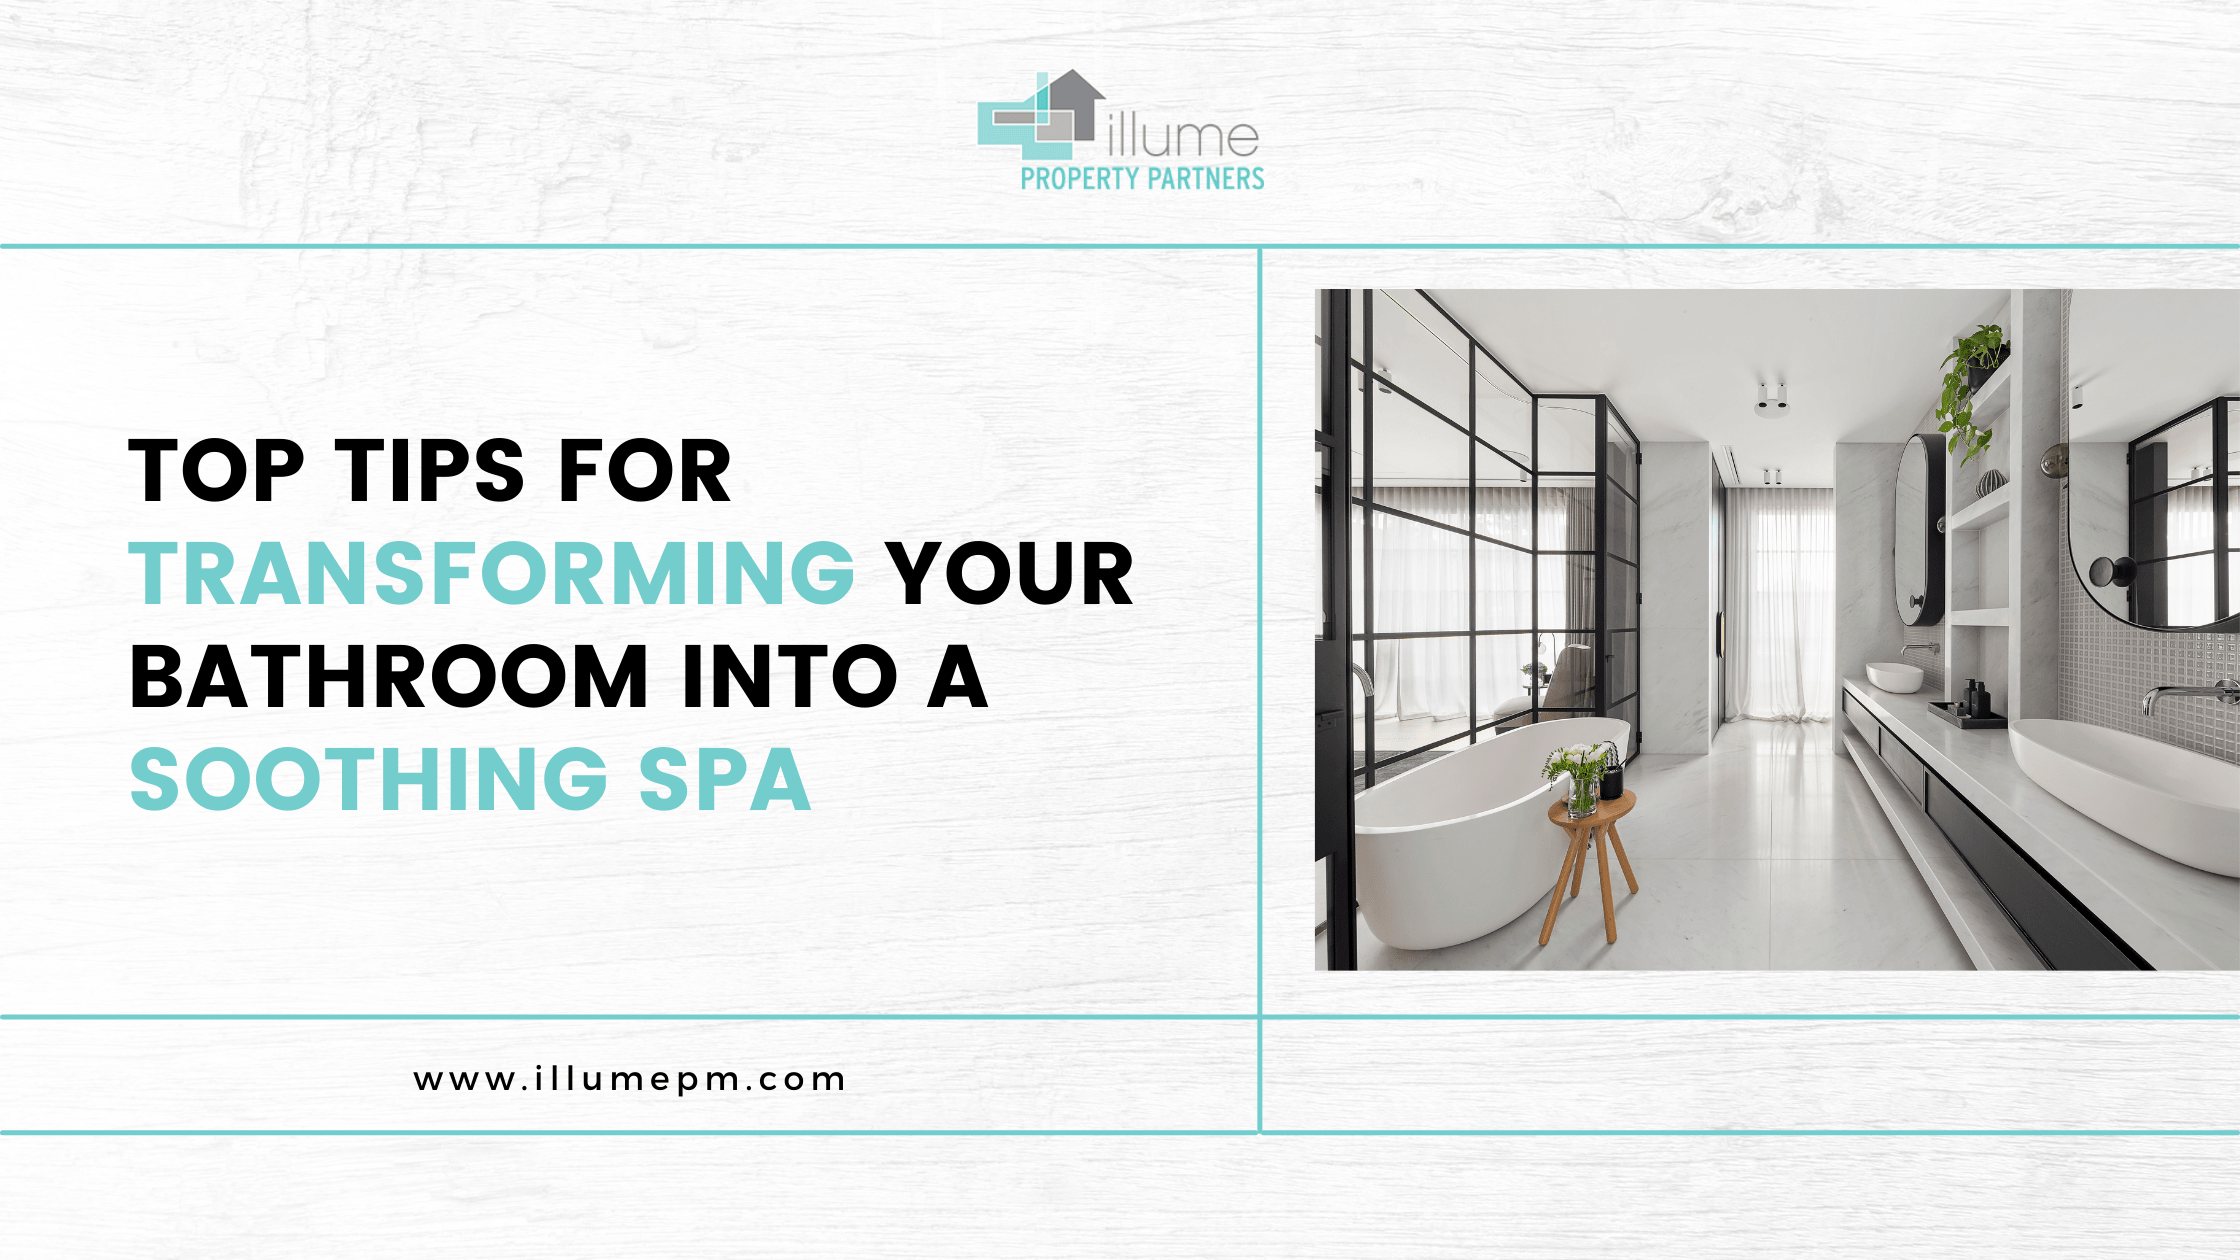 Top 10 Tips for Transforming Your Bathroom into a Soothing Spa